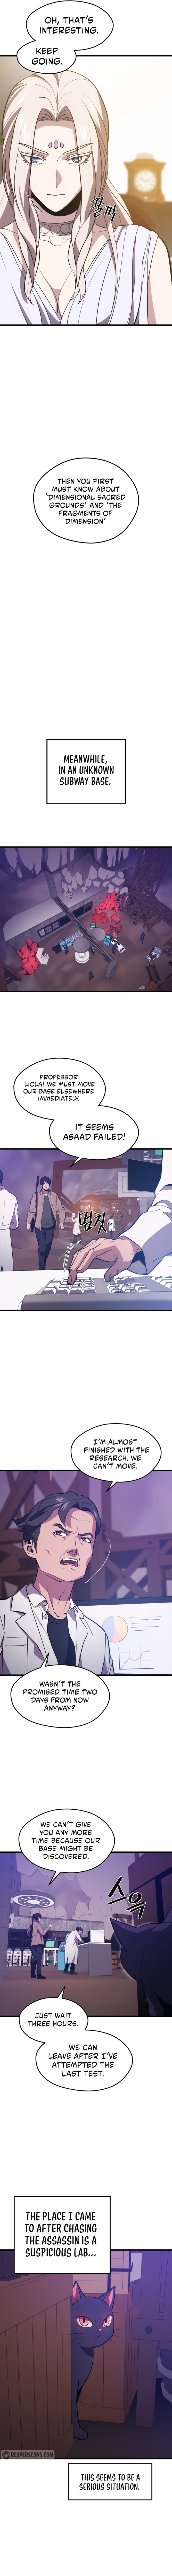 Seoul Station Necromancer - Chapter 47 Page 12